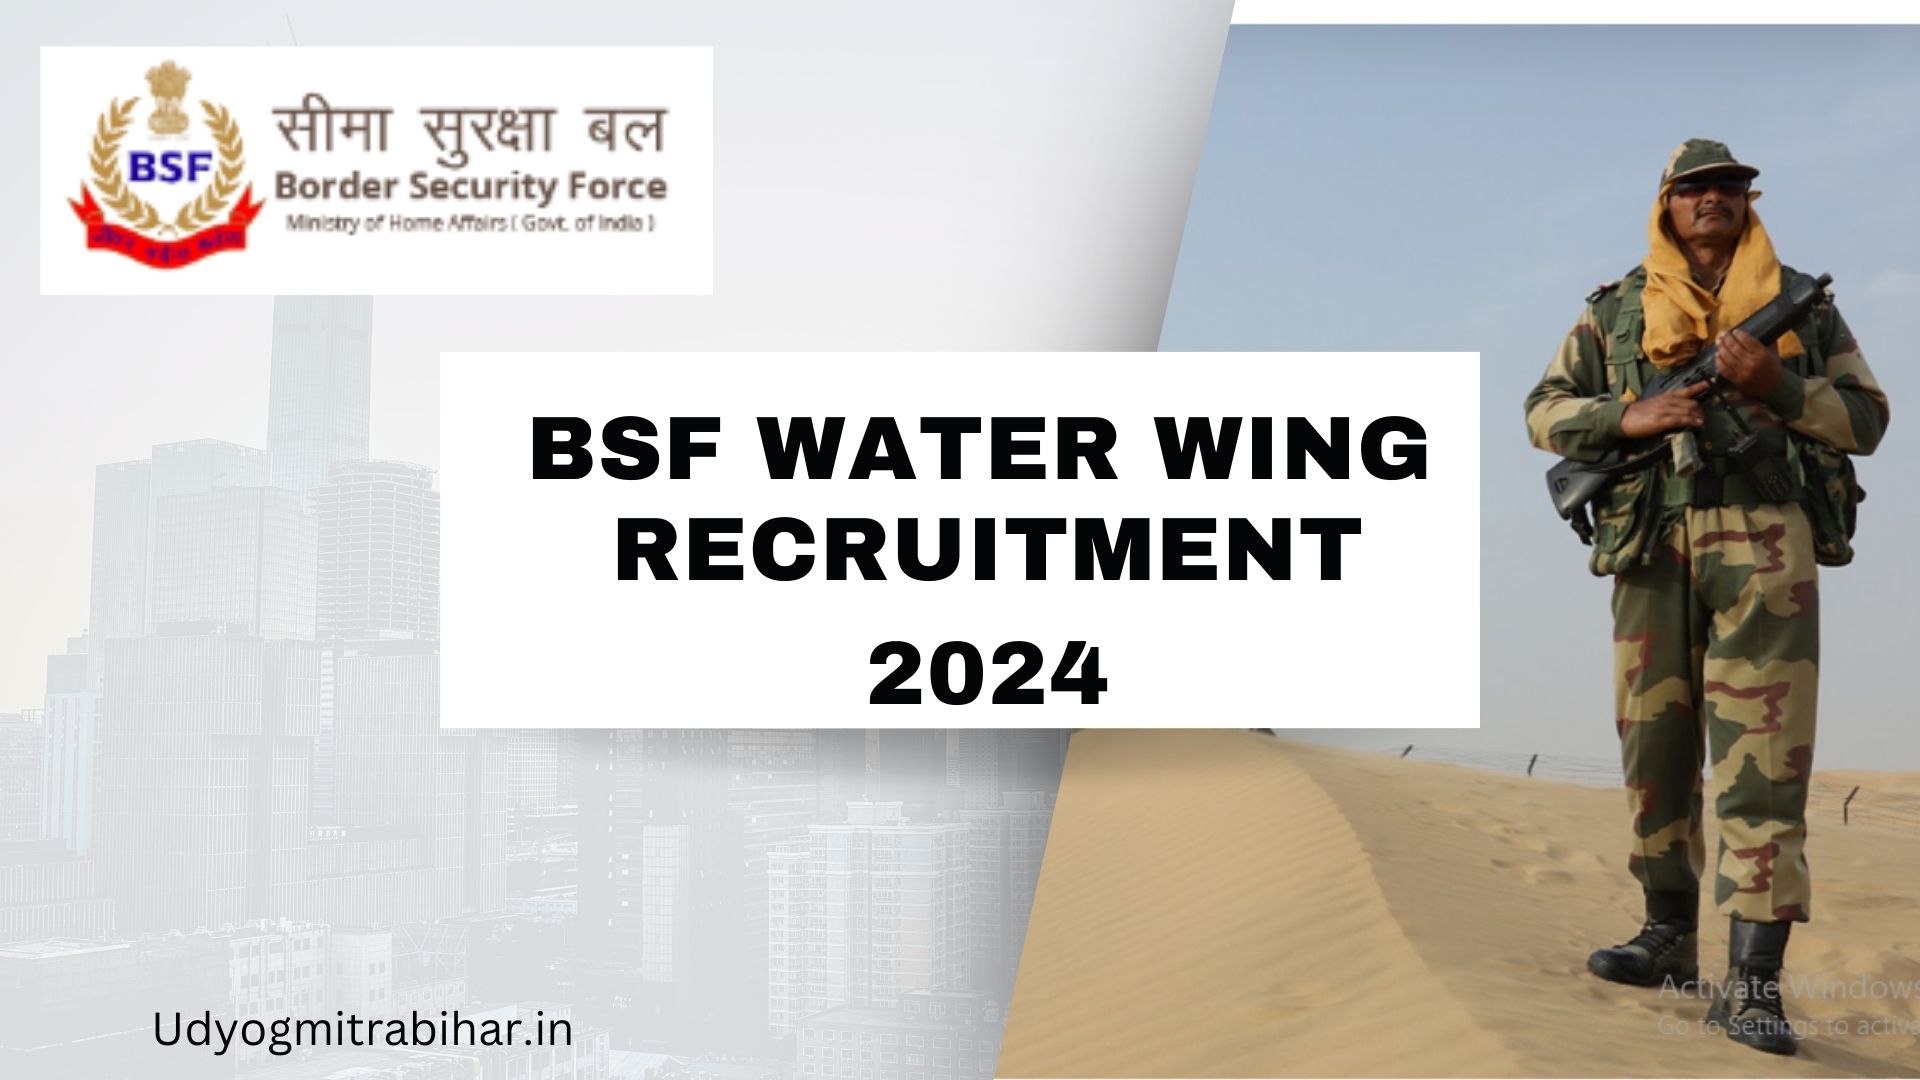 BSF Water Wing Recruitment 2024 for 162 Posts, Application Process, Eligibility Criteria, Salary, Selection Process